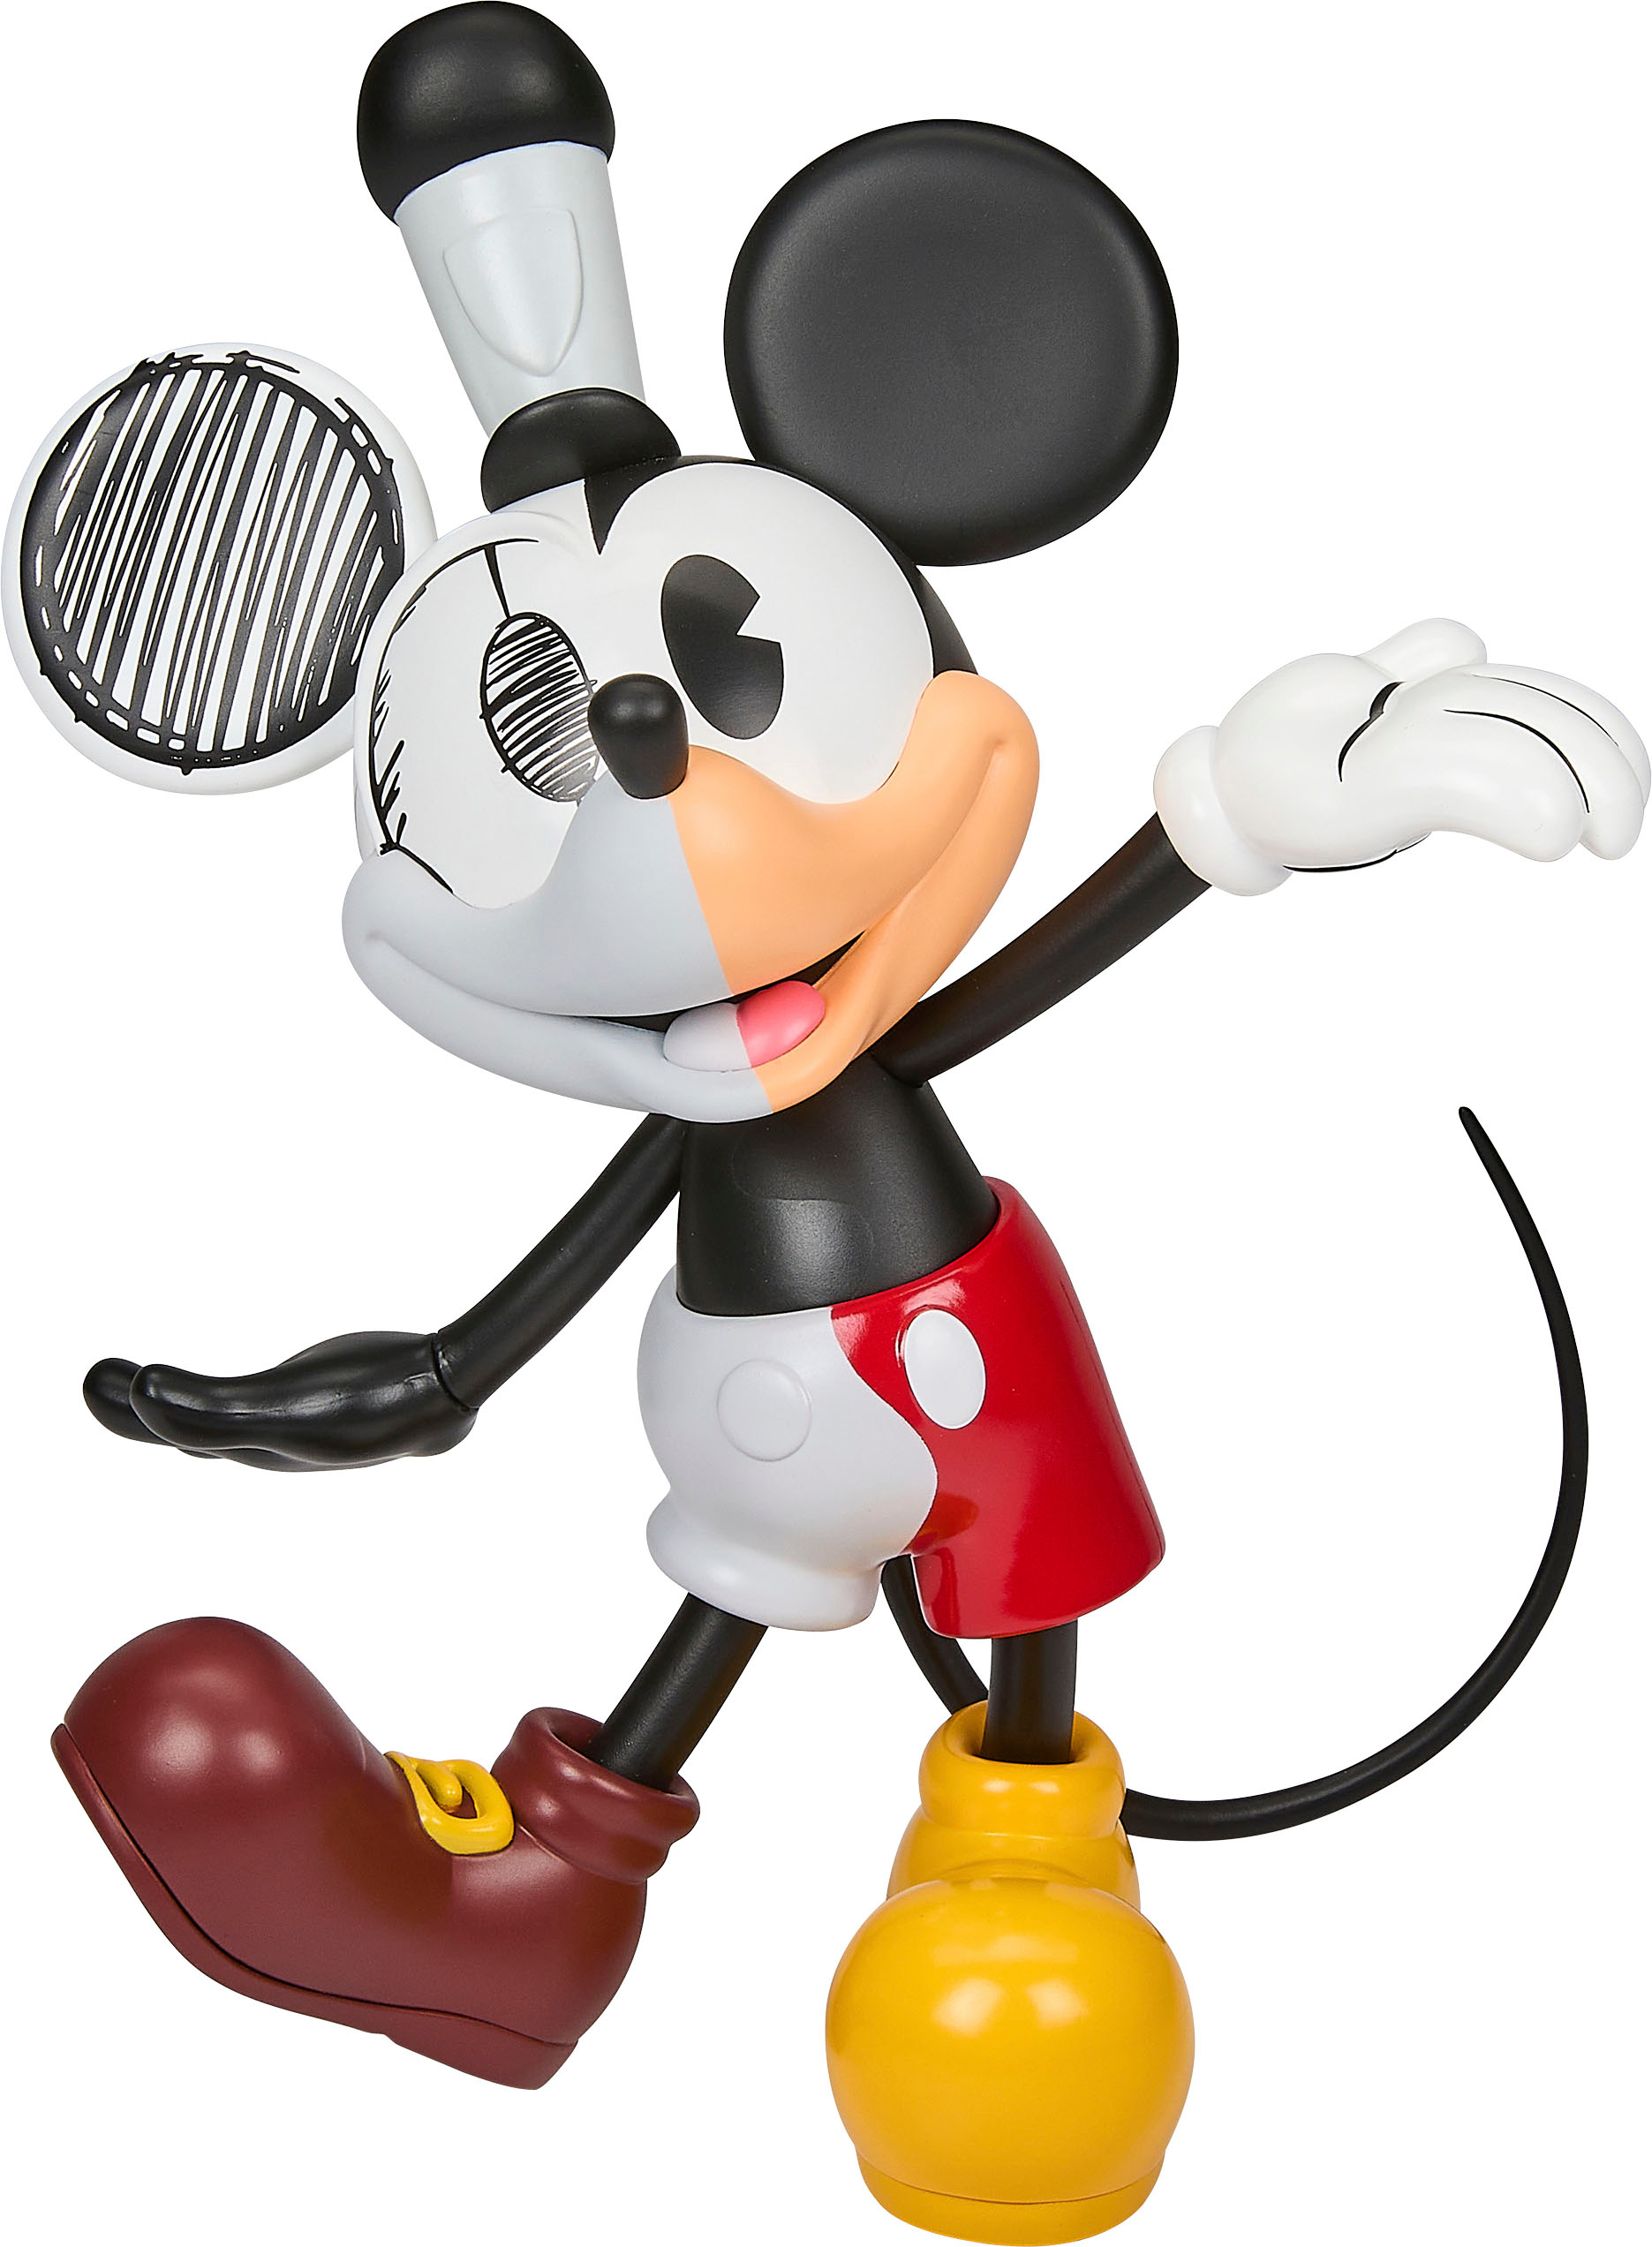 Disney Collectibles Featuring Mickey Mouse & Friends